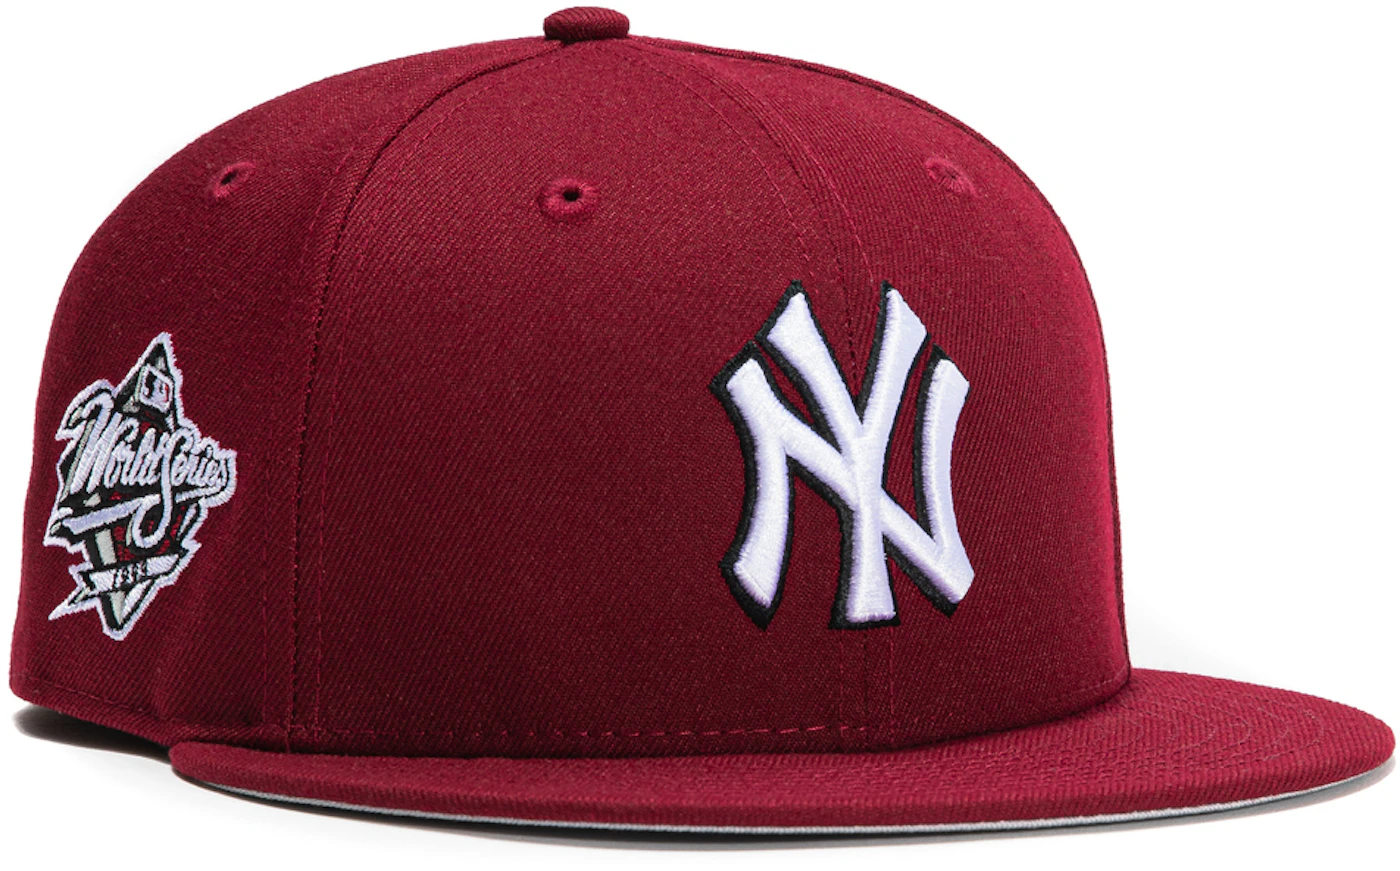 New Era Cardinal Red/White New York Yankees Basic 59Fifty Fitted hat Cap (7